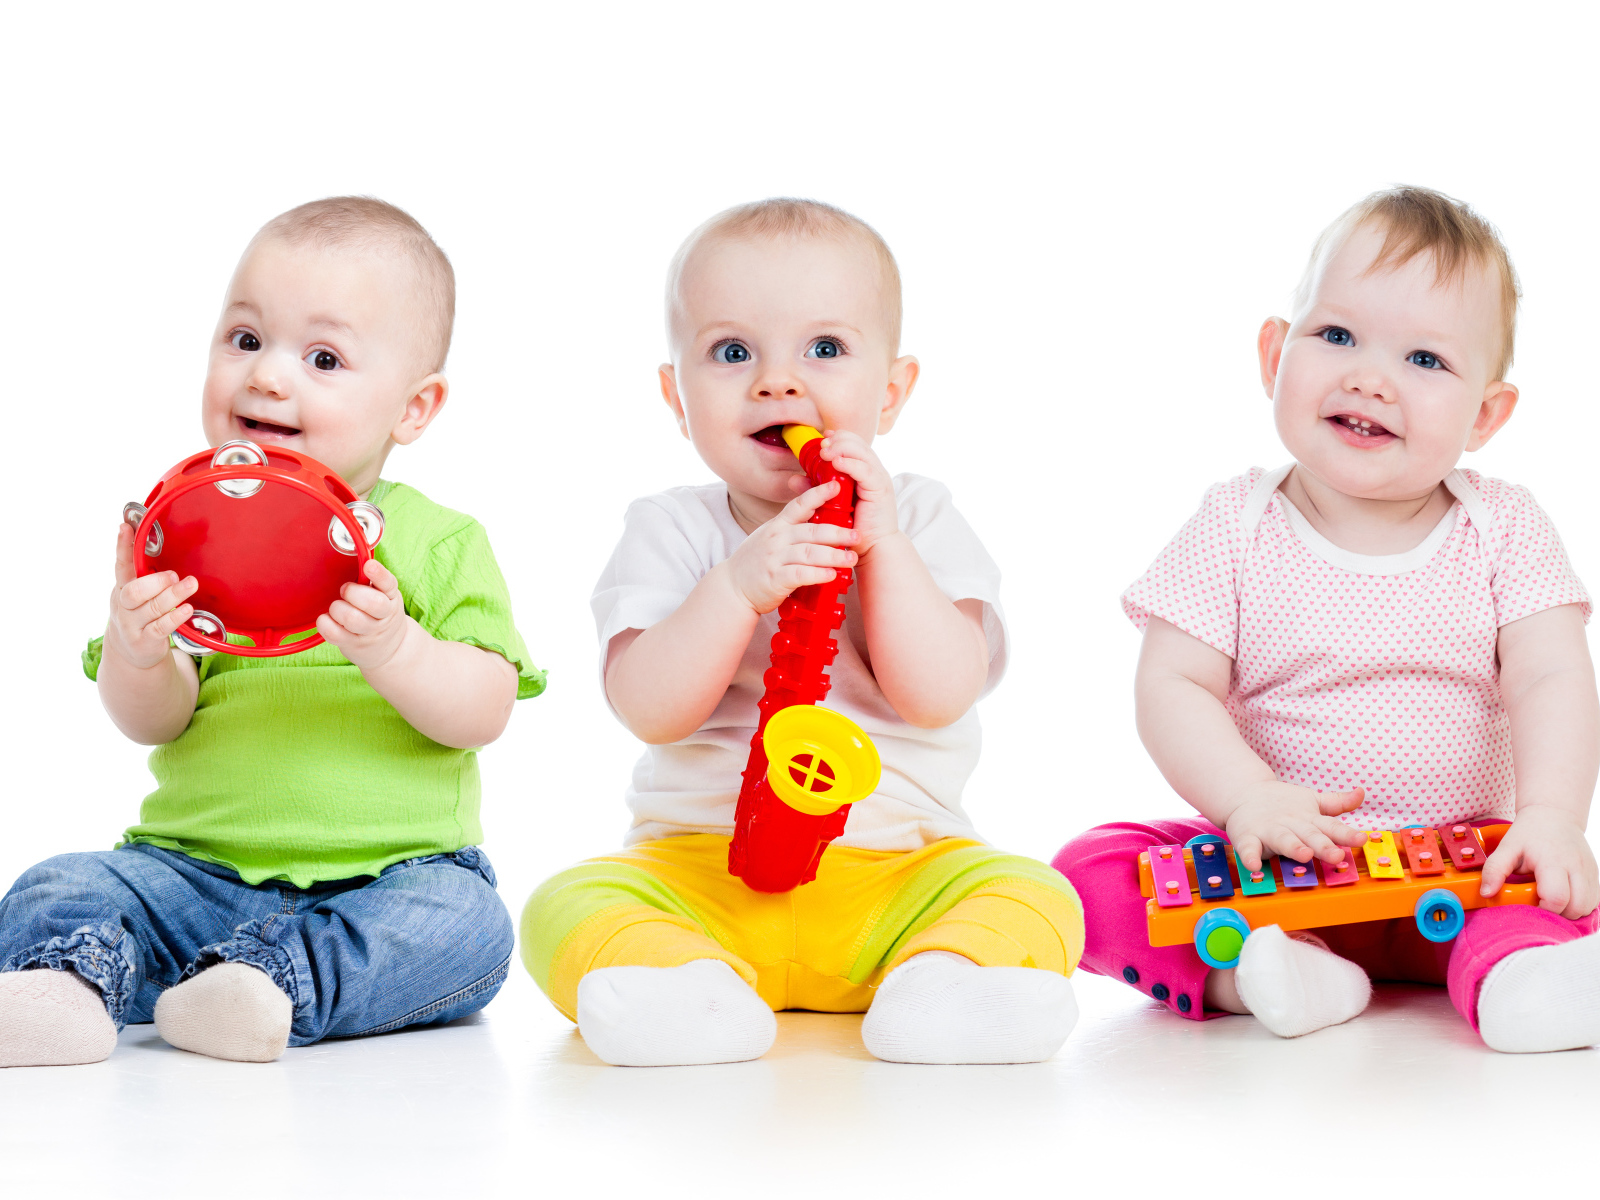 Three smiling babies playing against a white background